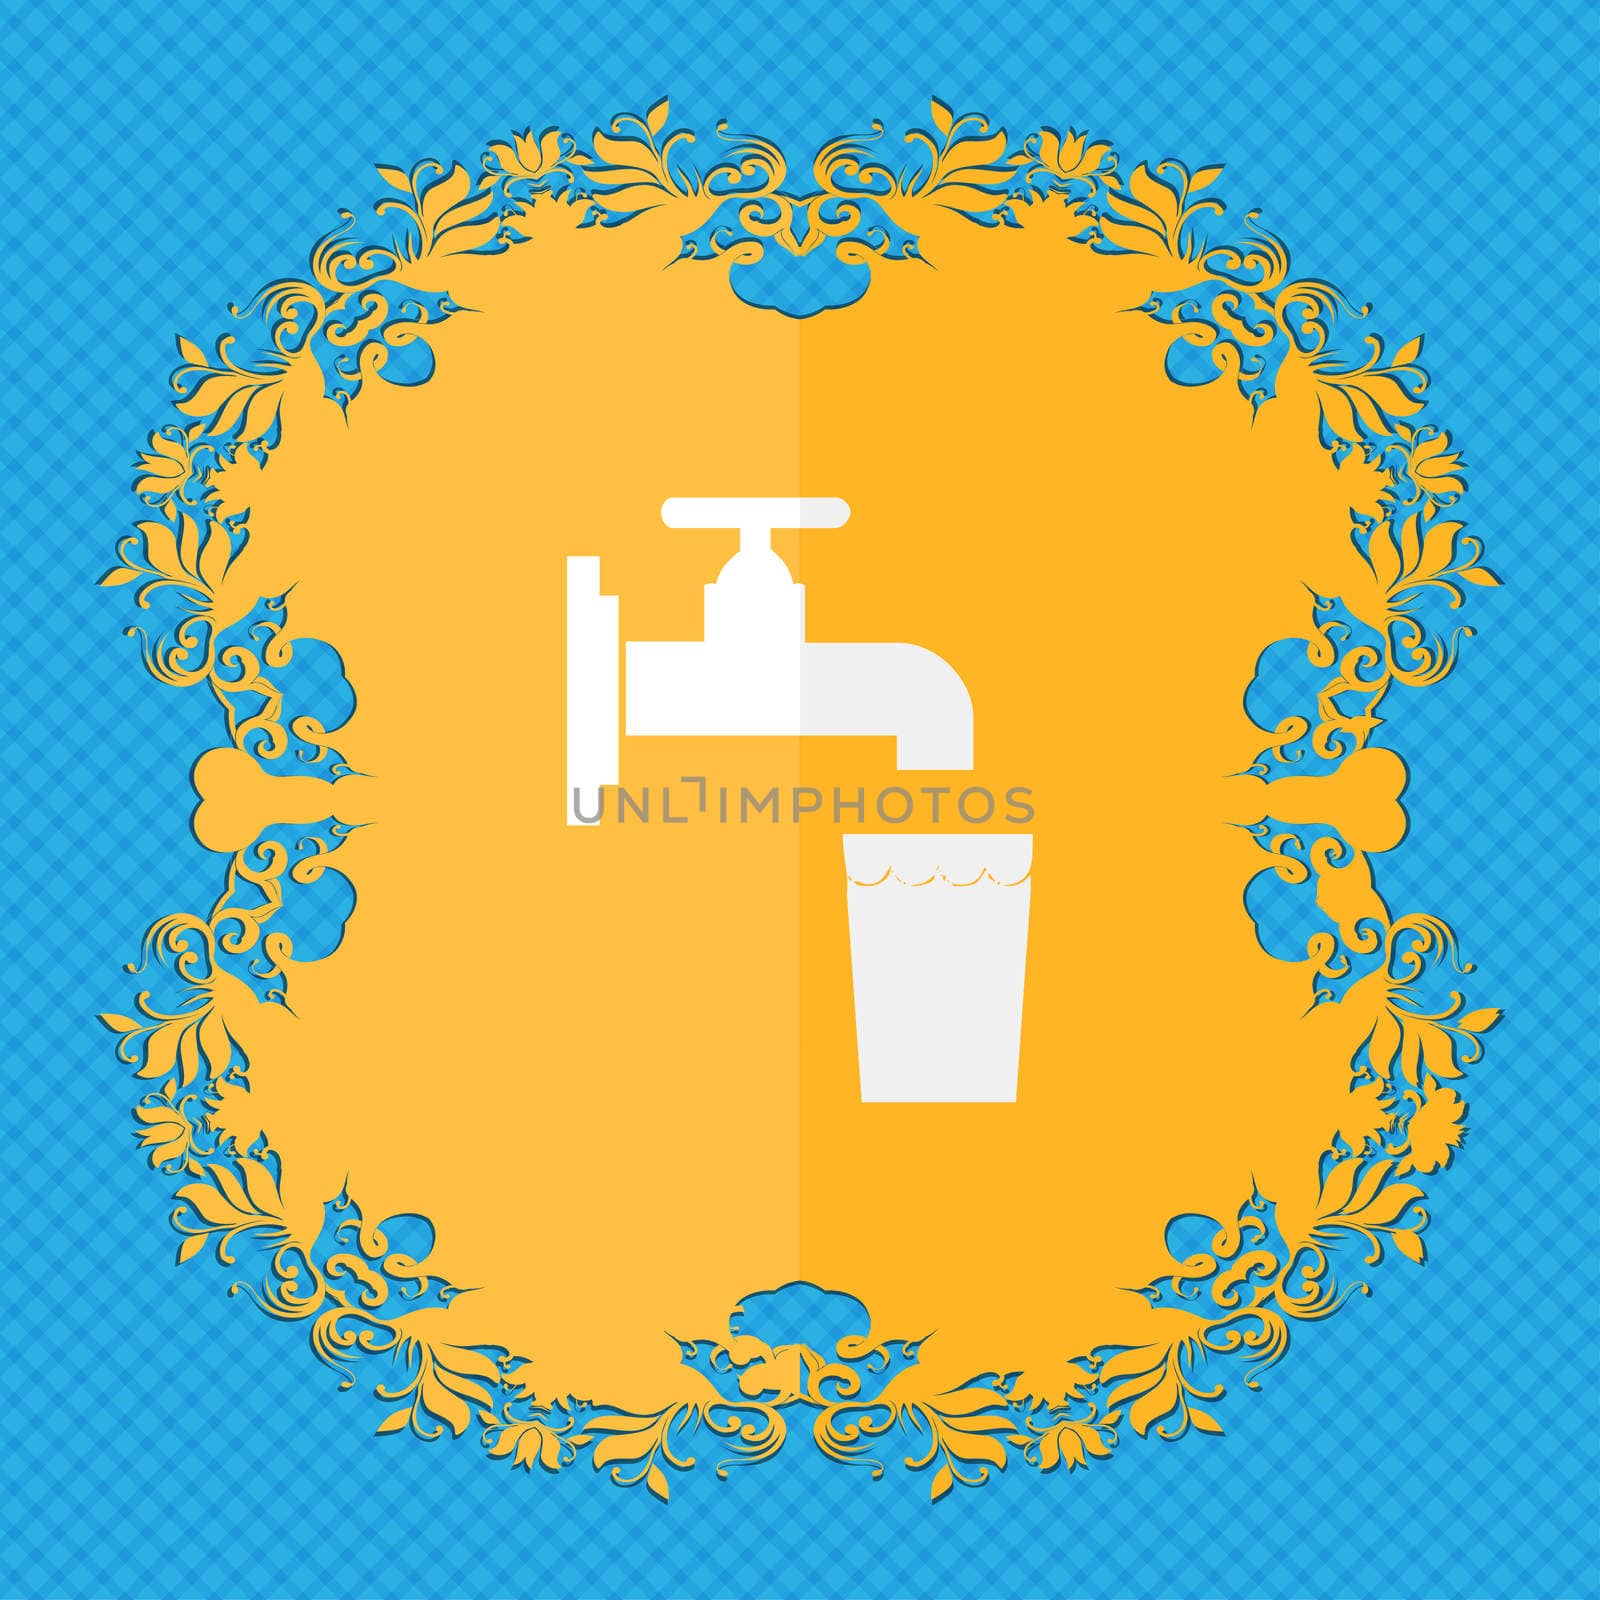 faucet, glass, water. Floral flat design on a blue abstract background with place for your text. illustration